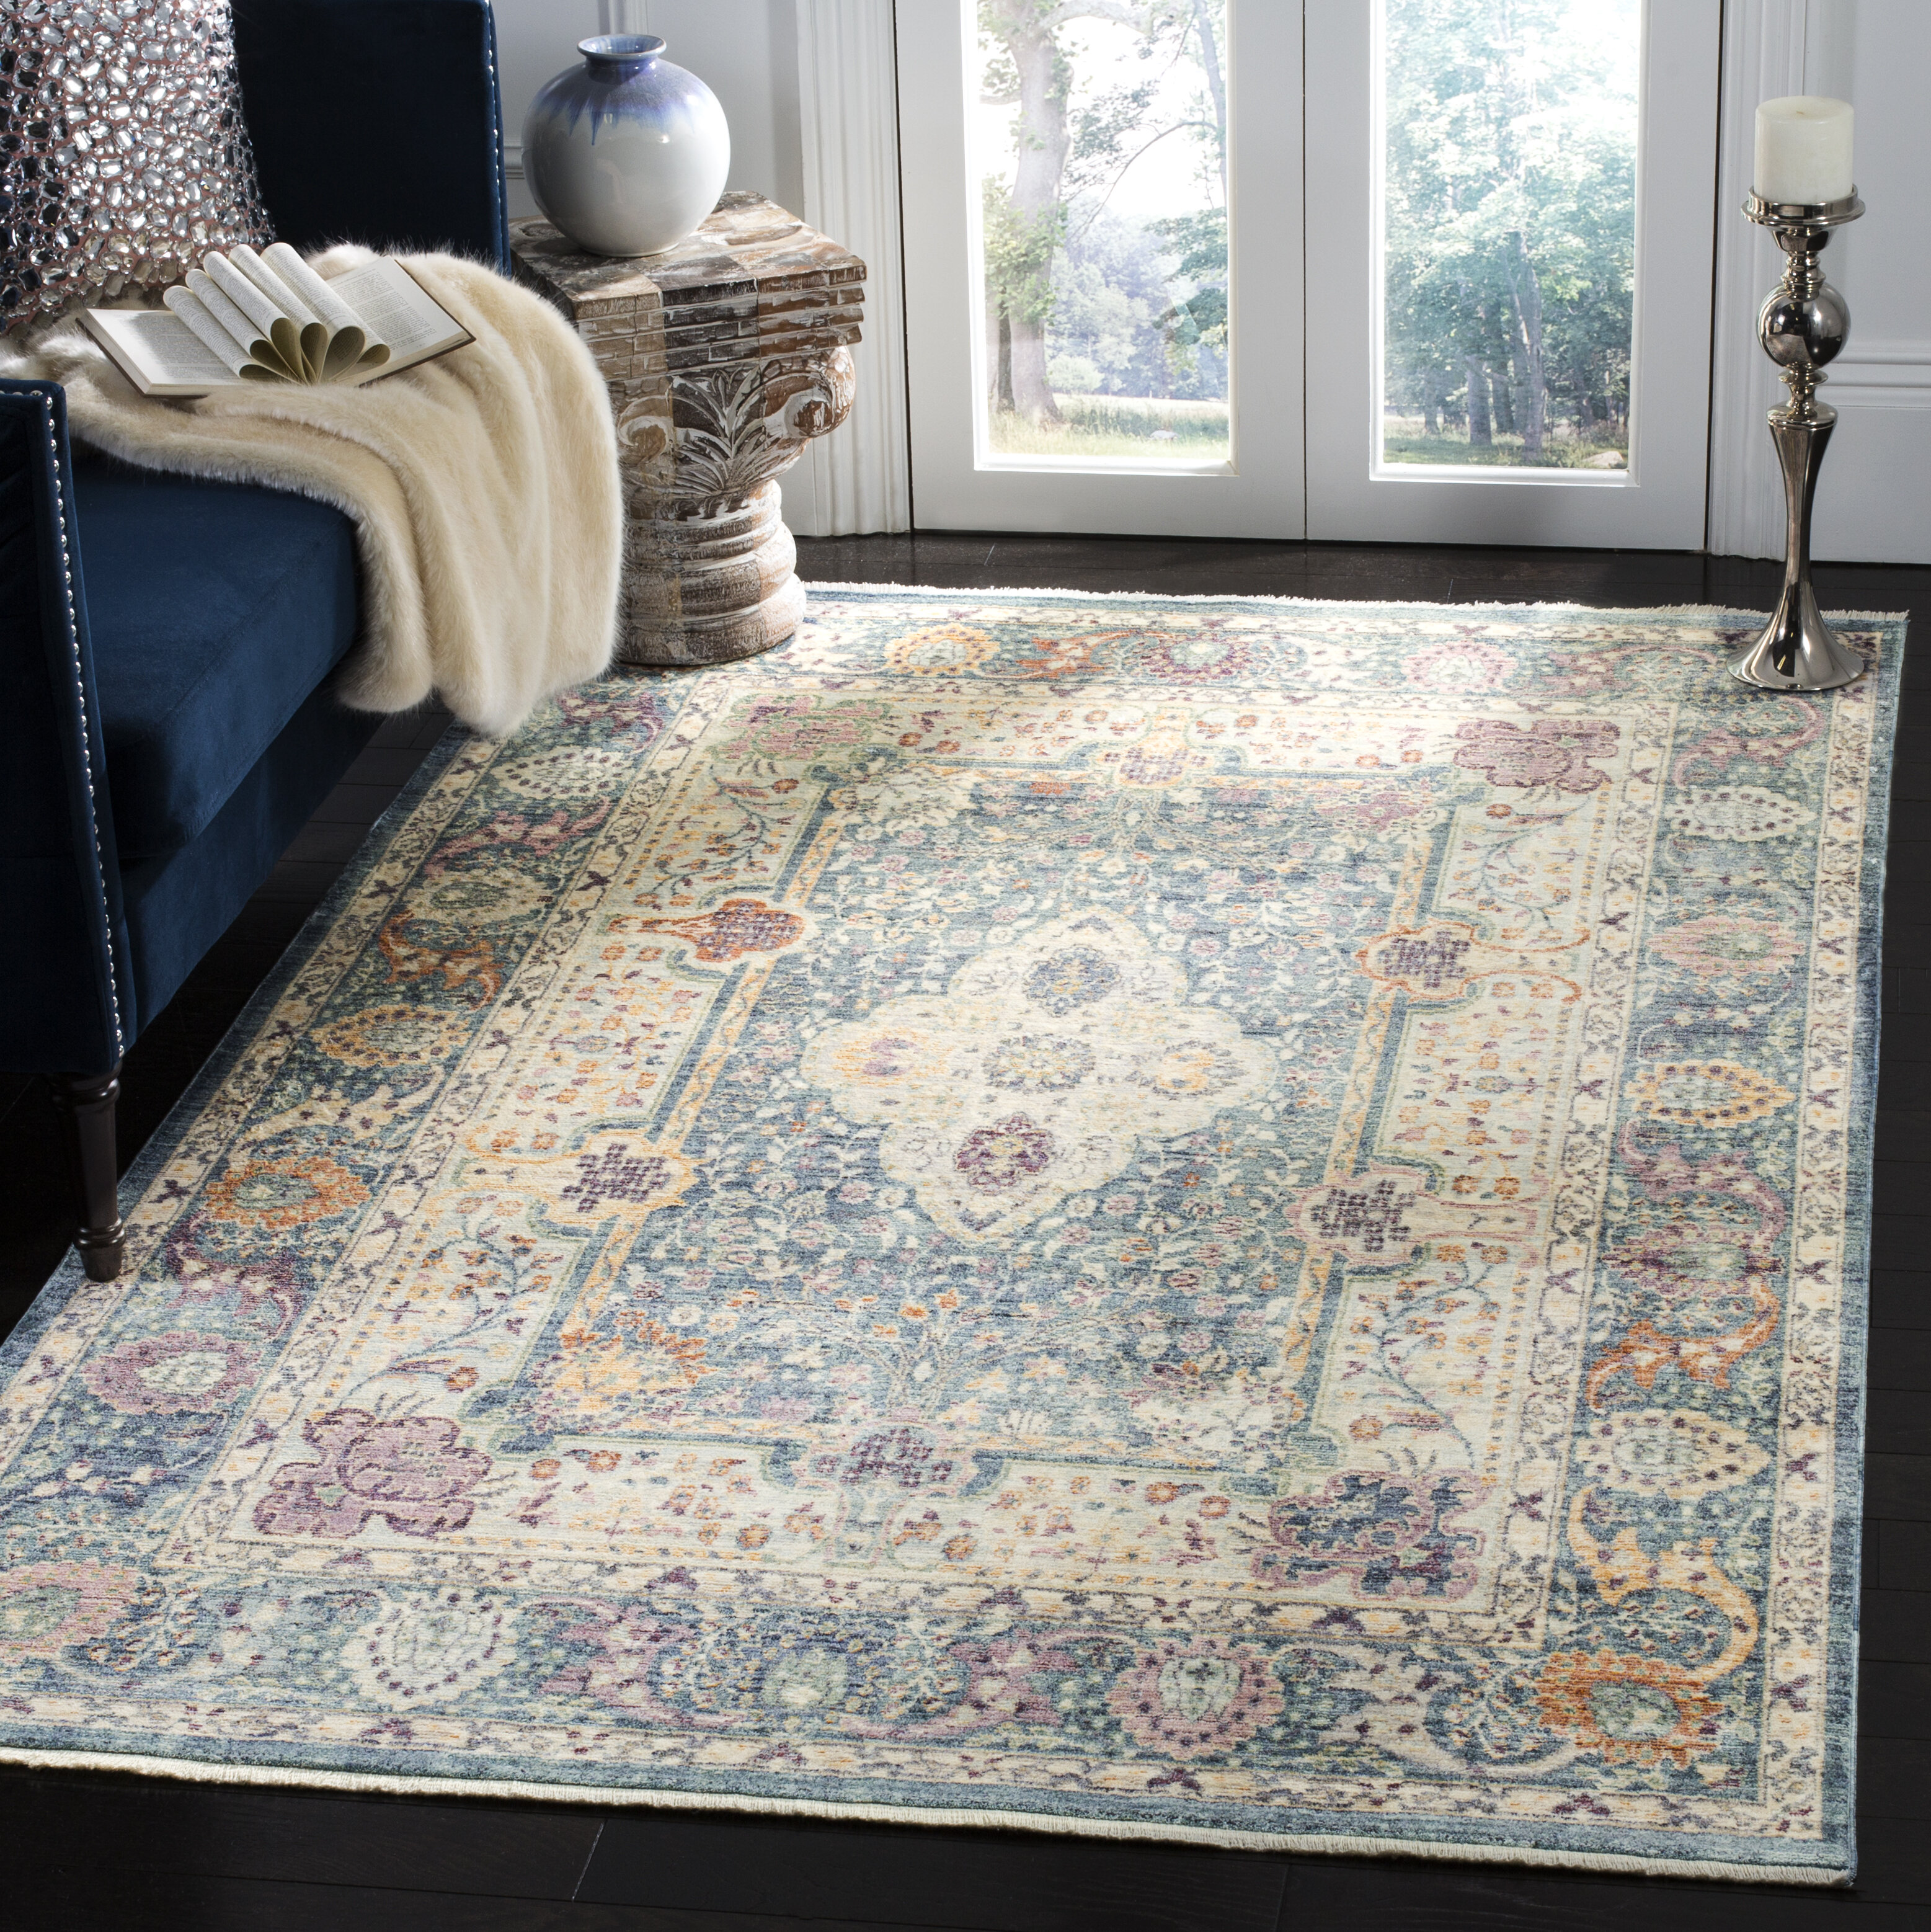 Better Bathrooms SOFT ACRYLIC RUGS "MIRADA" Very Thick And Densely Woven HIGH QUALITY 